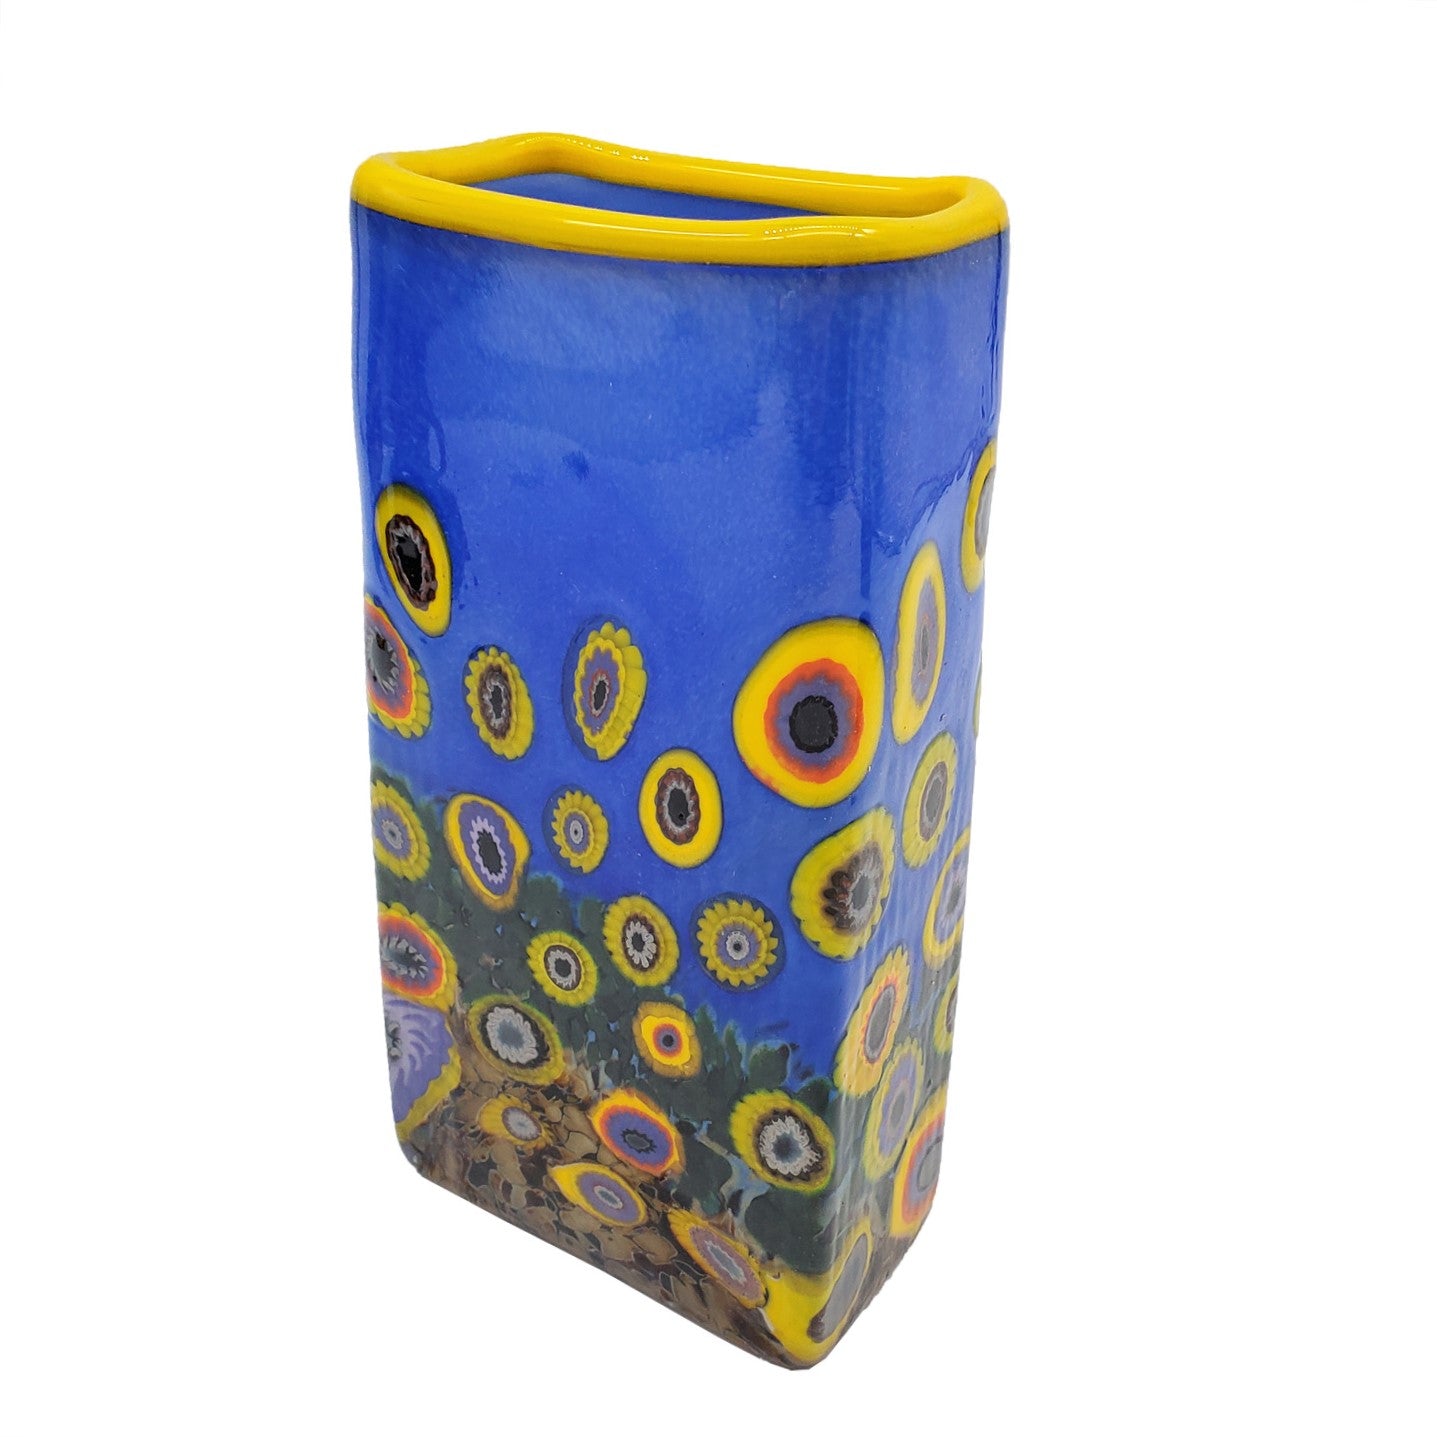 Glass Vase - Sunflowers with Blue Skies